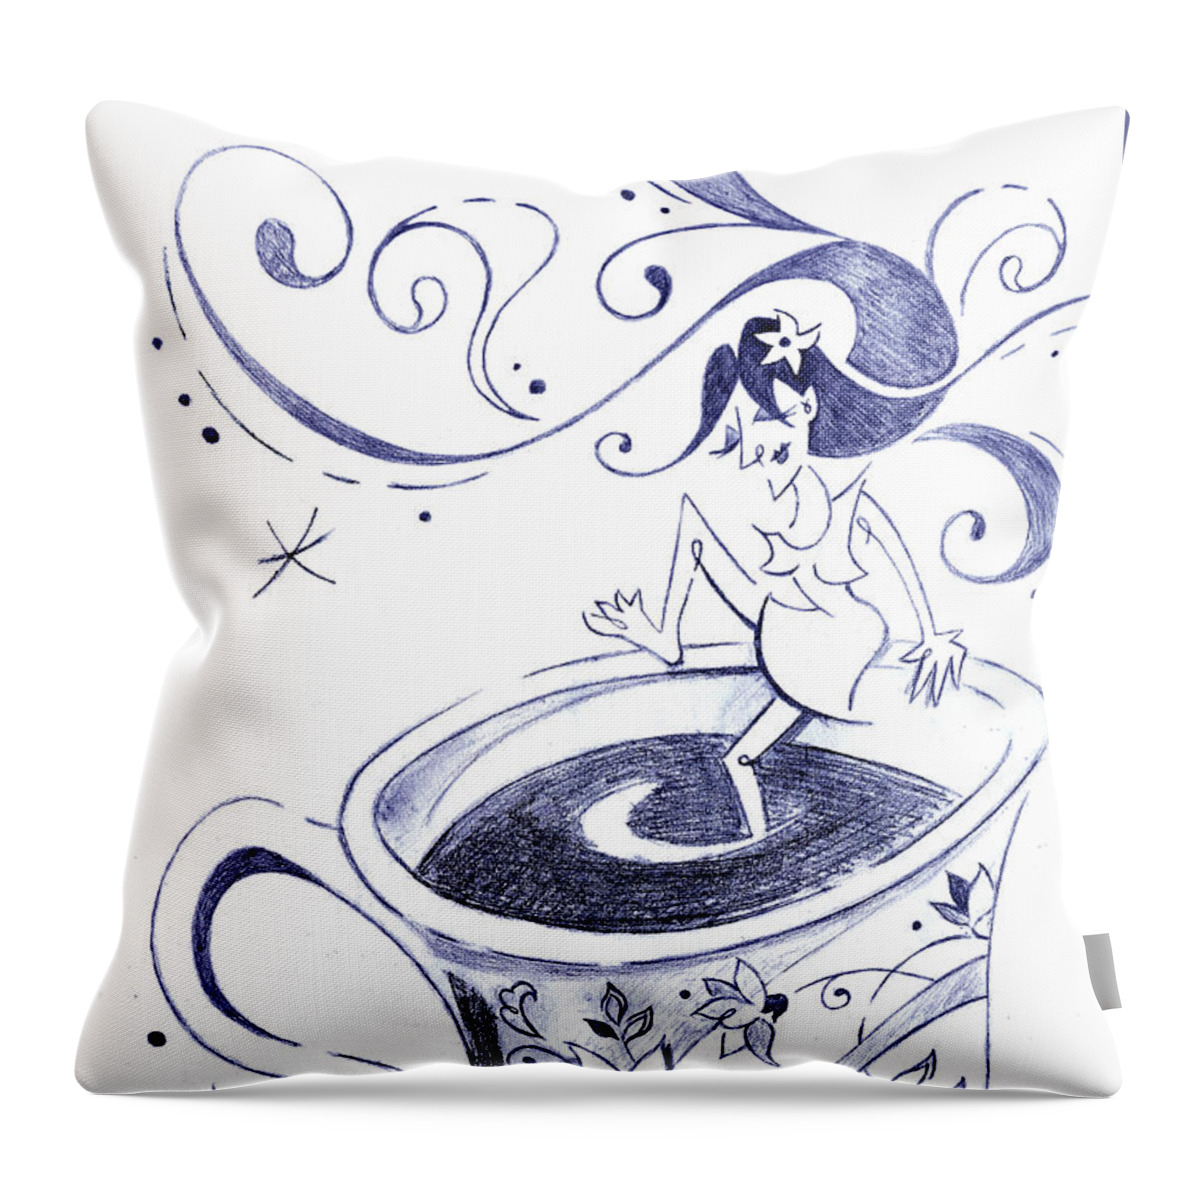 Coffee Throw Pillow featuring the drawing Kaffee - Arte Cafe - Coffee Cup Drawing by Arte Venezia